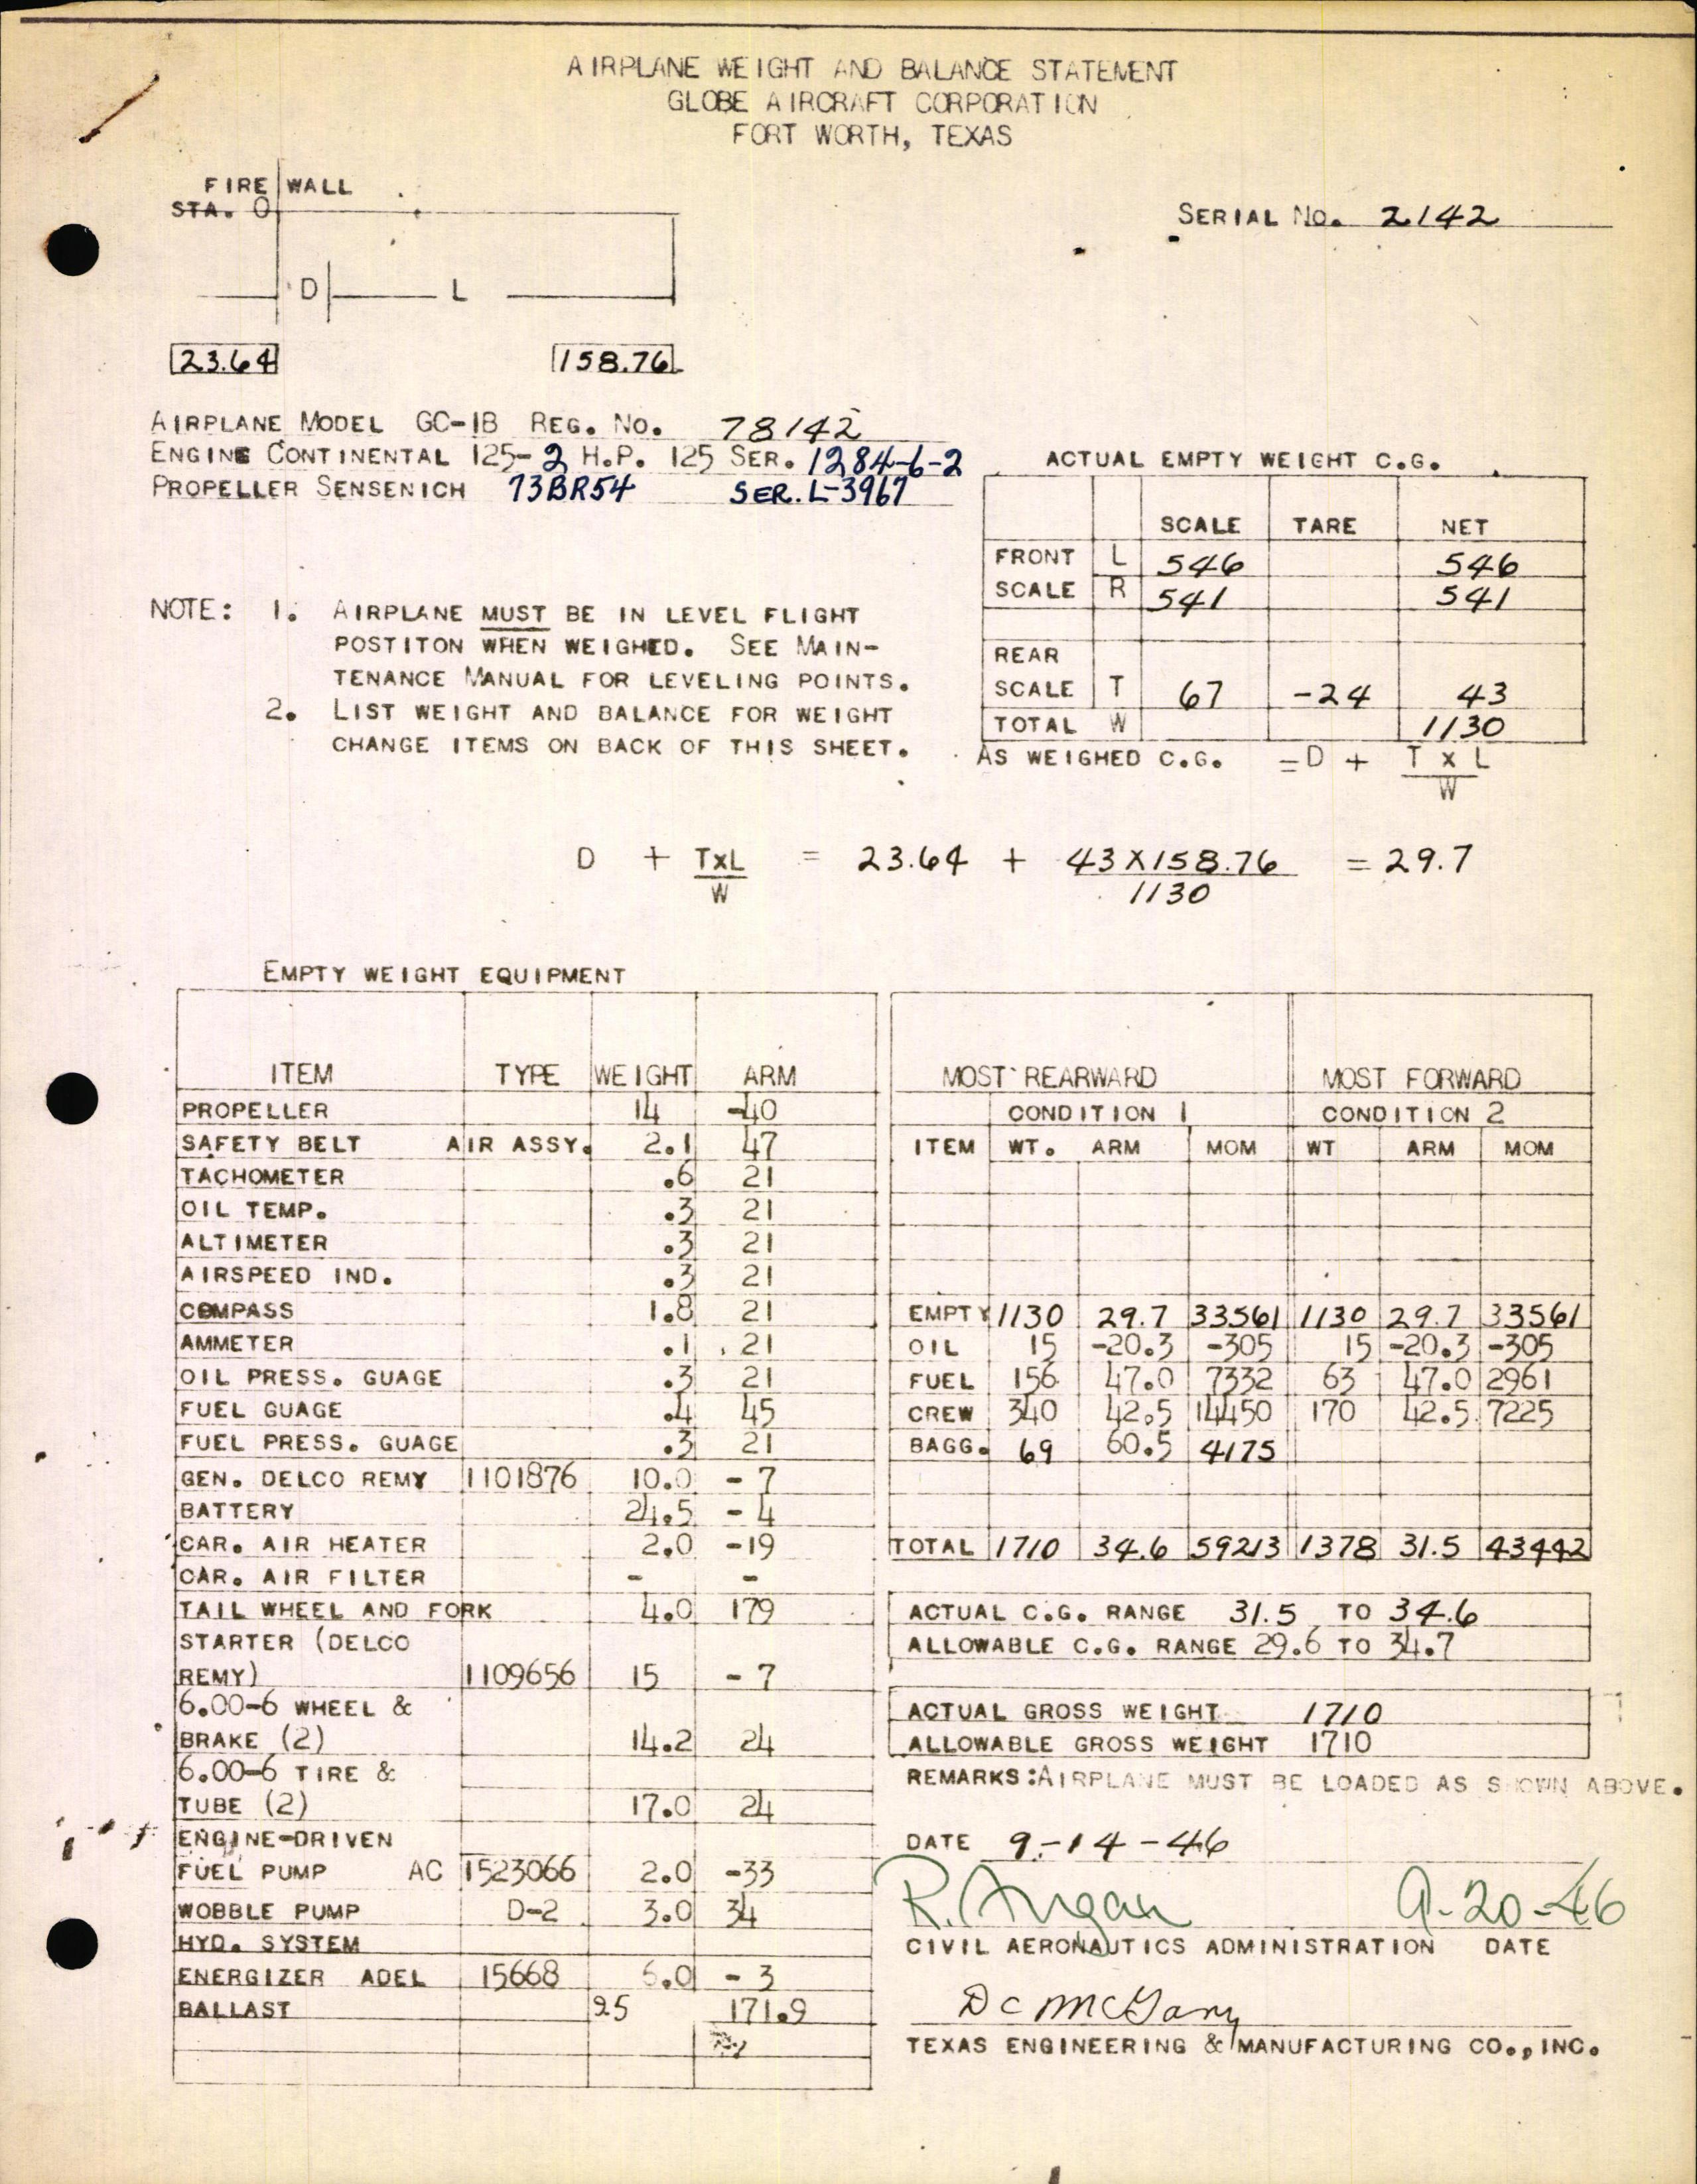 Sample page 3 from AirCorps Library document: Technical Information for Serial Number 2142